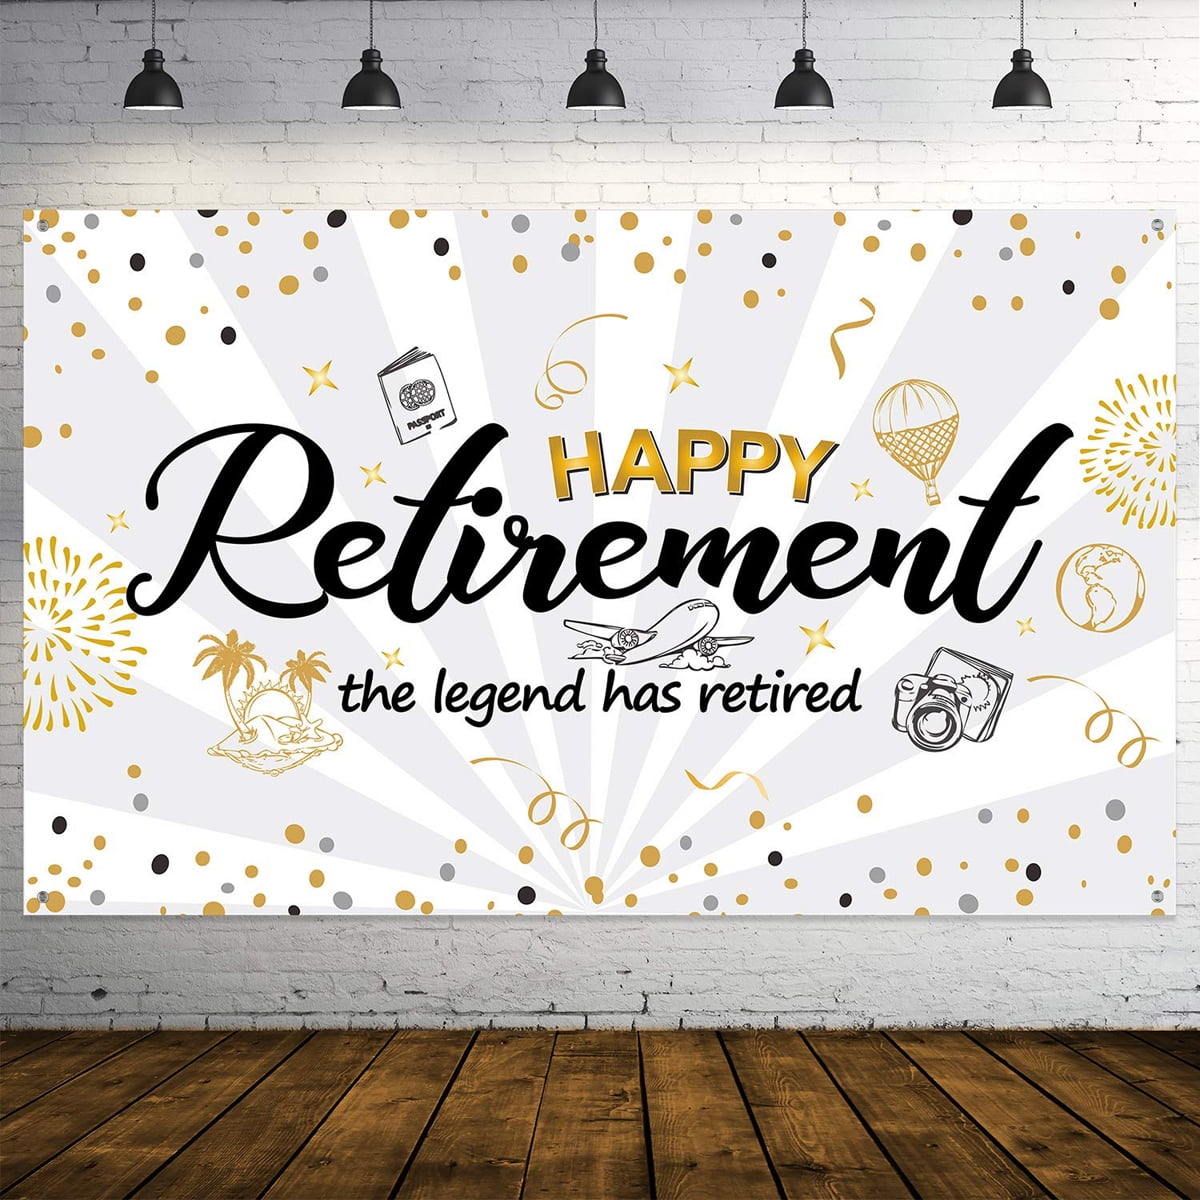 Happy Retirement Banner Bunting and Hanging Swirls for Retirement Themed Party Favors Black Gold Retirement Party Supplies WATINC Happy Retirement Party Decorations Retired Gifts for Men Women 